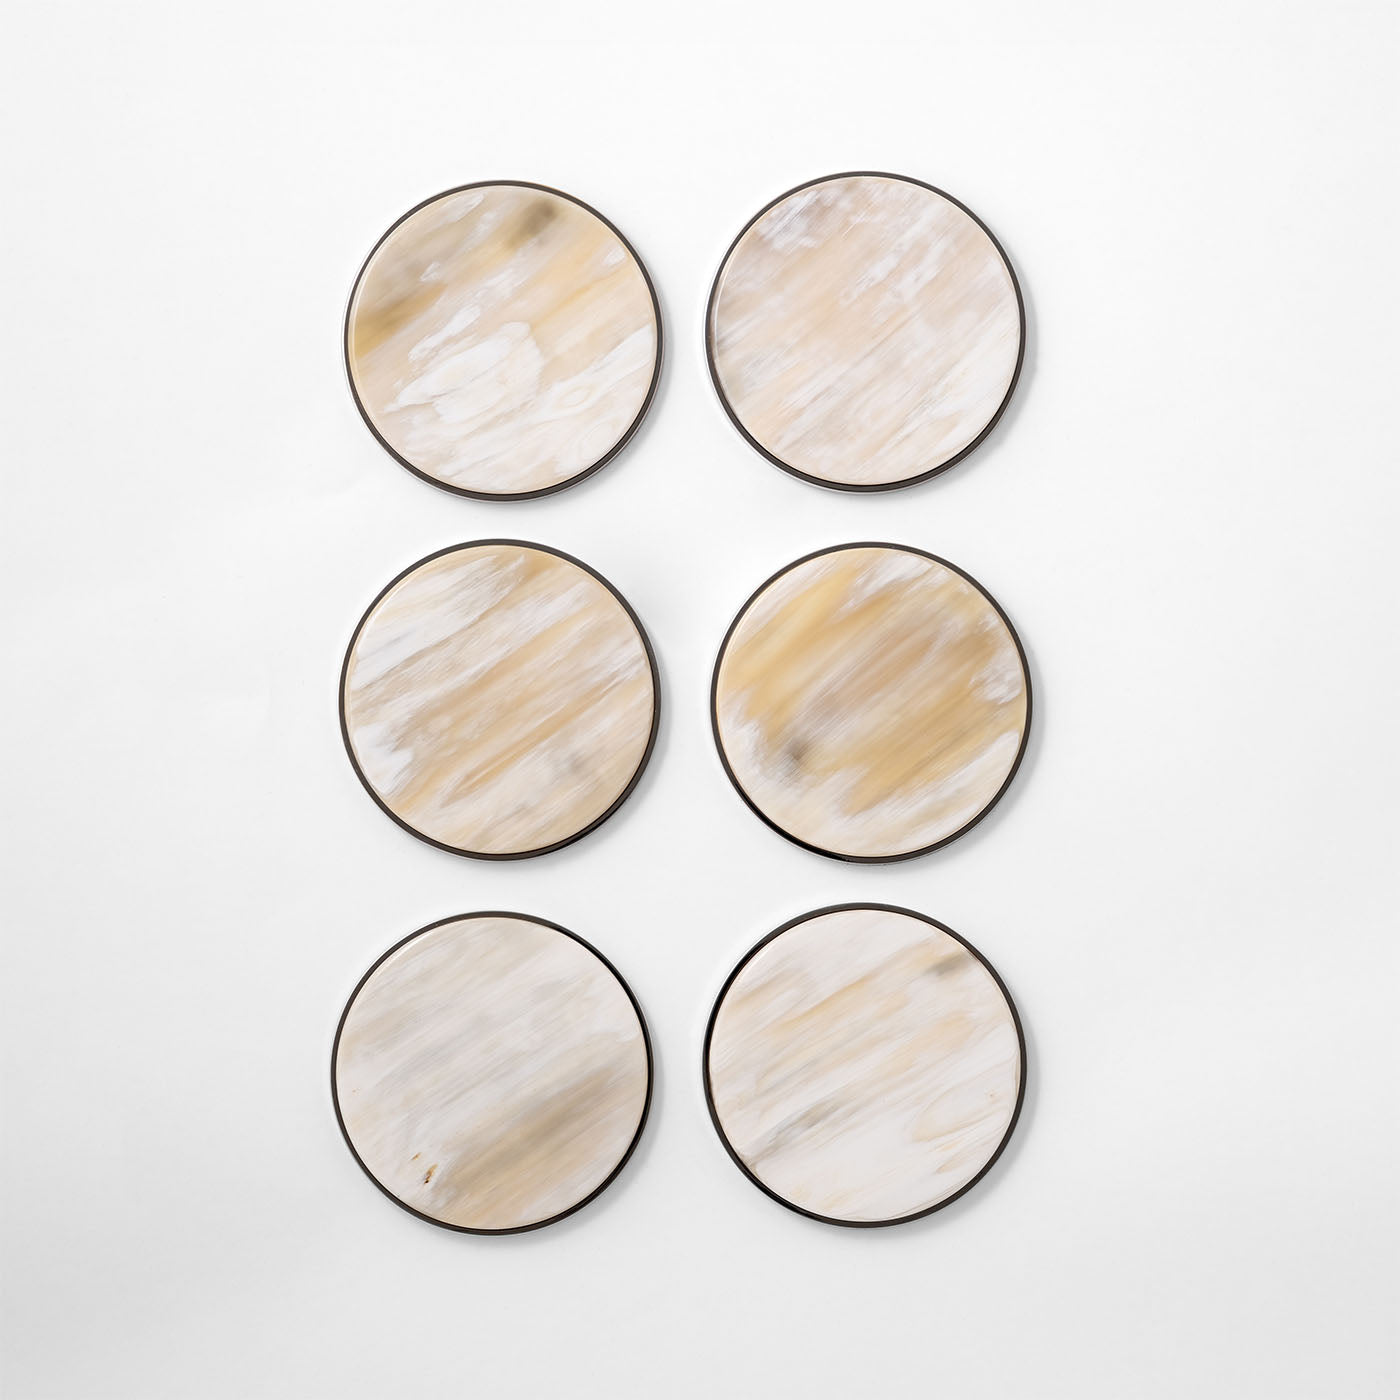 Natural White Blond Horn Coasters 6 pcs  - Alternative view 1